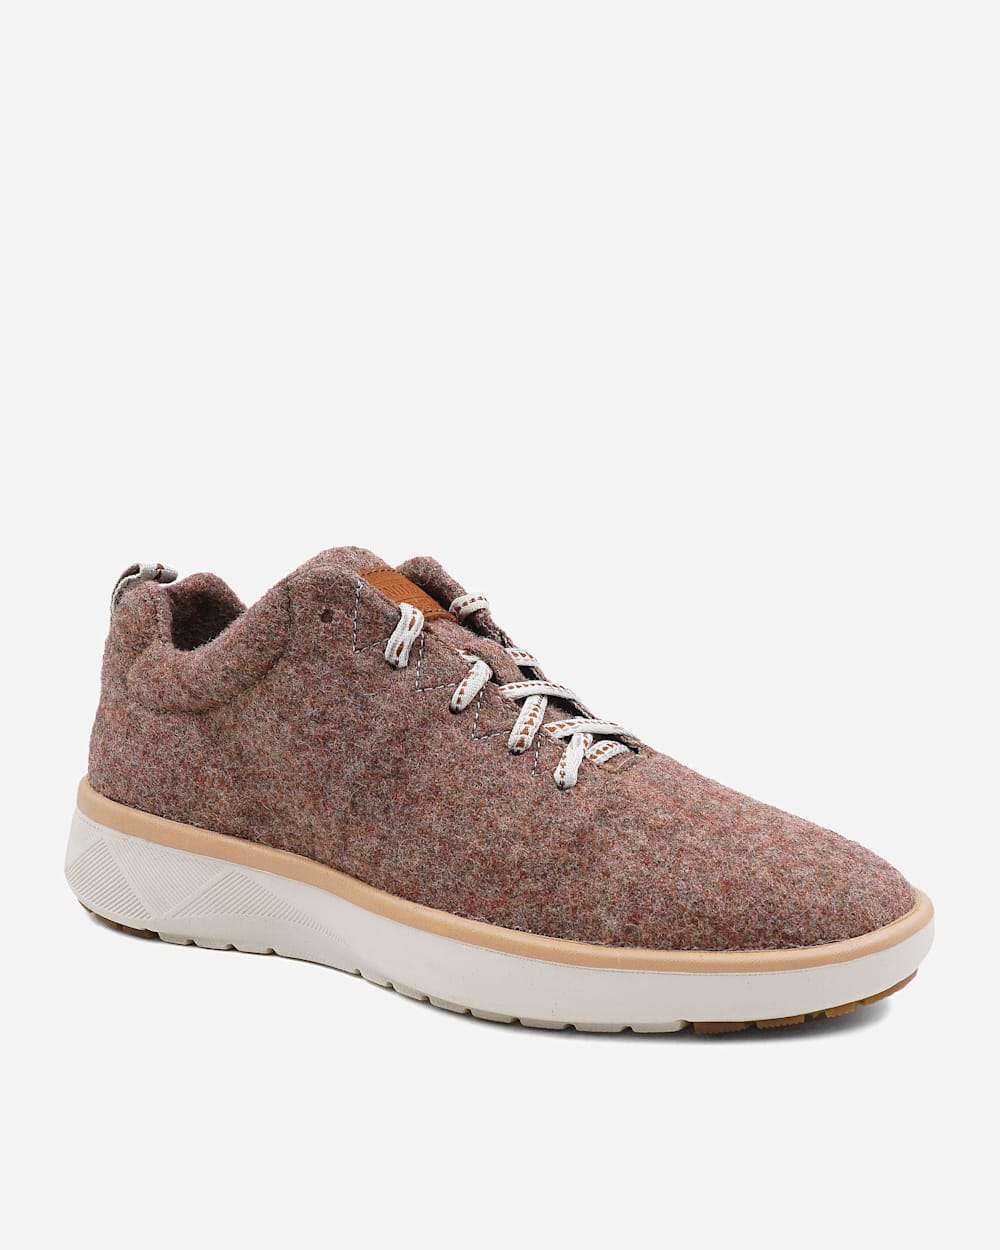 ALTERNATE VIEW OF WOMEN'S PENDLETON WOOL SNEAKERS IN TUSCANY HEATHER image number 2